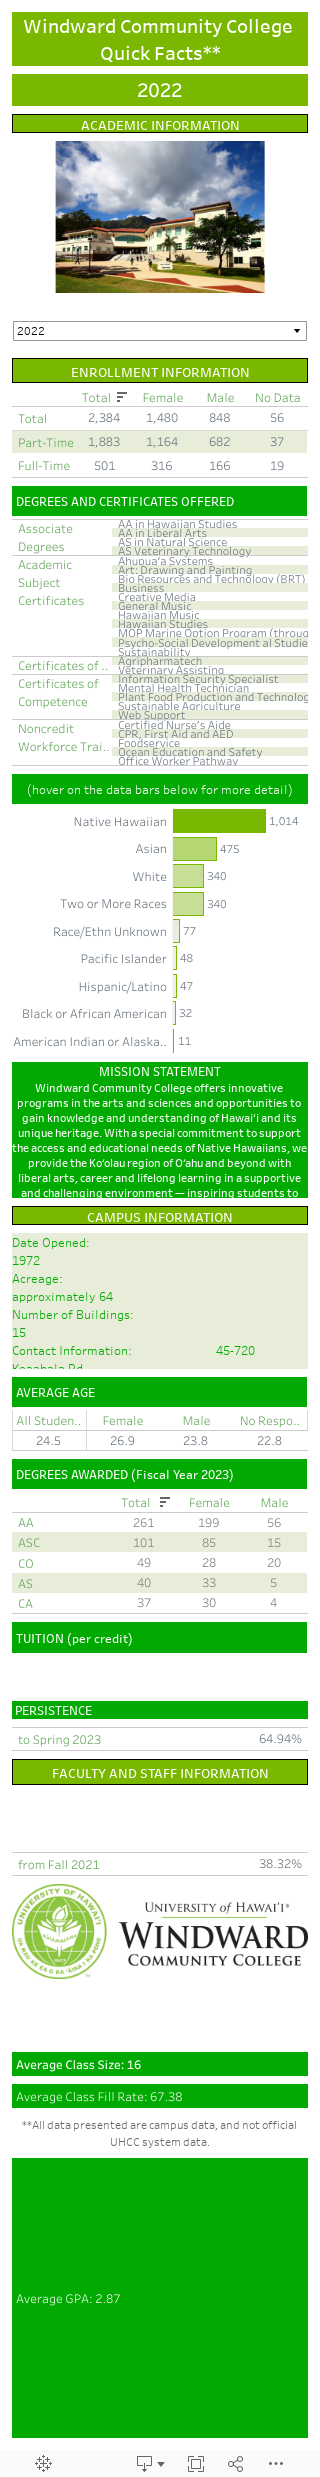 Windward Community College Quick Facts** 